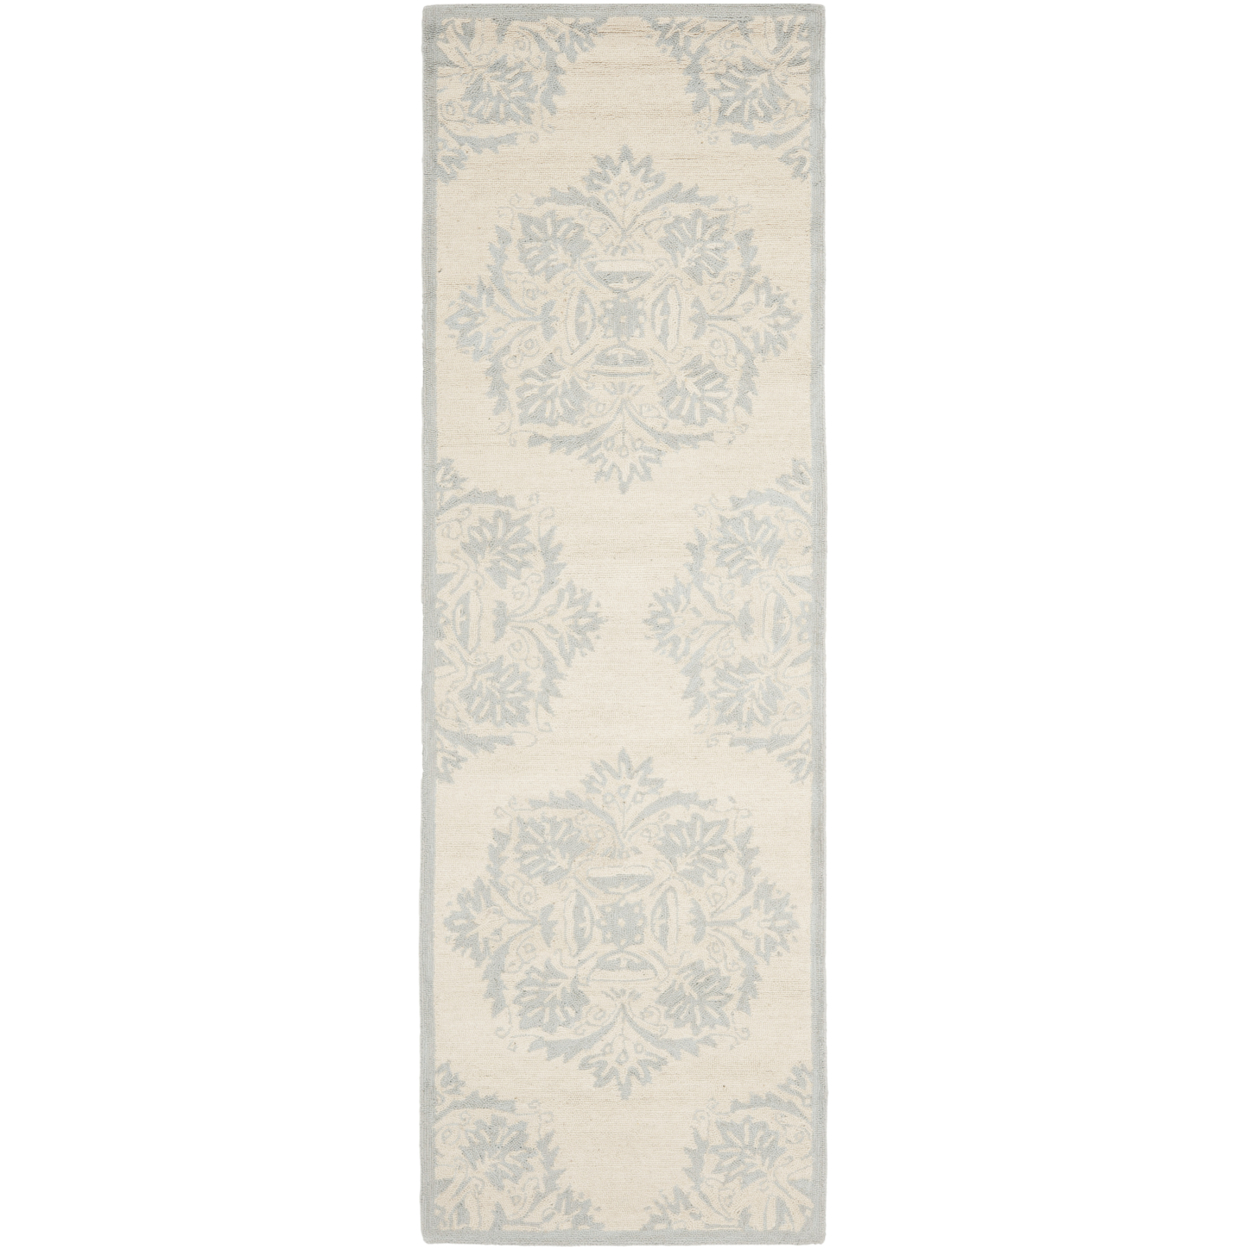 SAFAVIEH Chelsea HK359A Hand-hooked Ivory / Blue Rug - 2' 6 X 12'